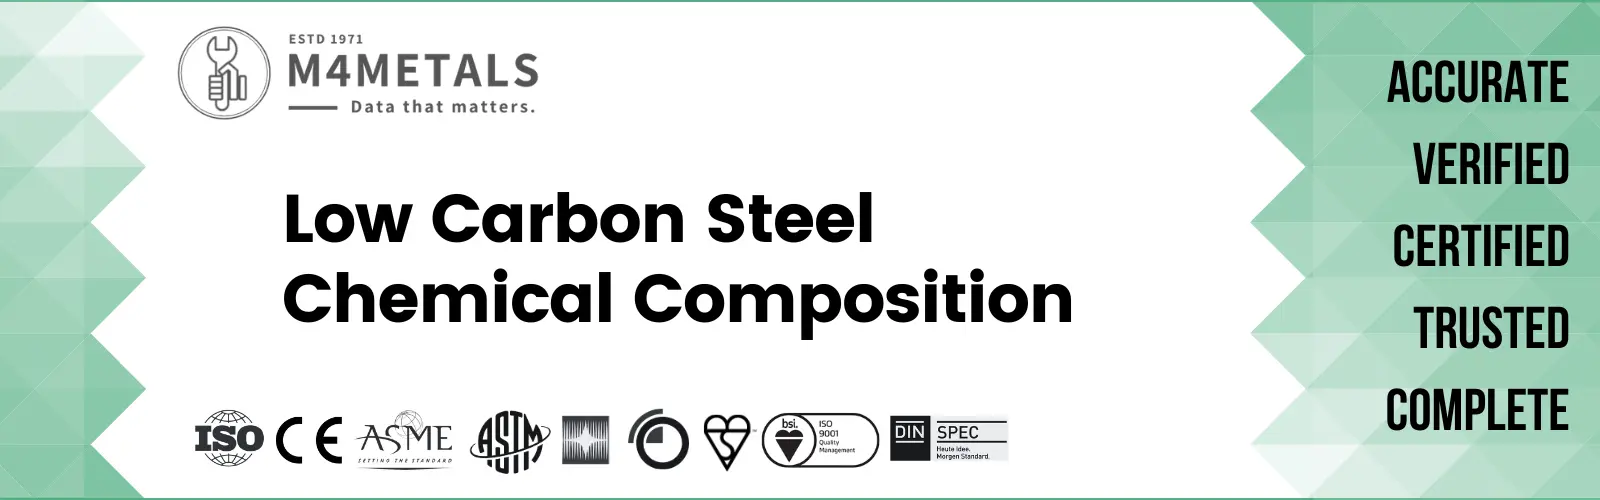 Low Carbon Steel Chemical Composition